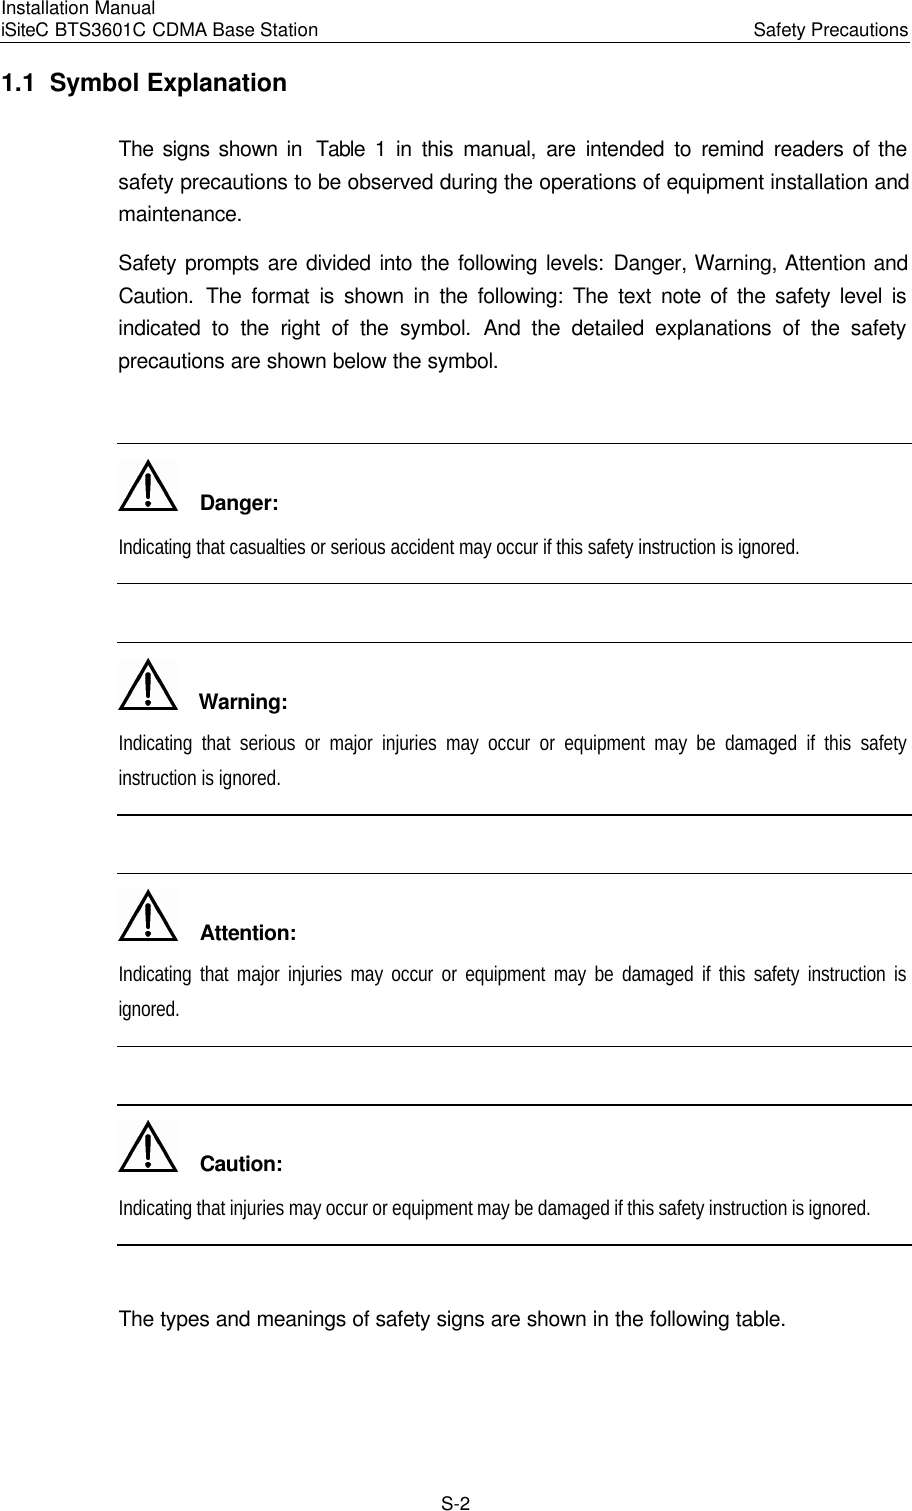 Installation Manual   iSiteC BTS3601C CDMA Base Station Safety Precautions　S-2 1.1  Symbol Explanation The signs shown in  Table 1 in this manual, are intended to remind readers of the safety precautions to be observed during the operations of equipment installation and maintenance. Safety prompts are divided into the following levels: Danger, Warning, Attention and Caution. The format is shown in the following: The text note of the safety level is indicated to the right of the symbol. And the detailed explanations of the safety precautions are shown below the symbol.    Danger: Indicating that casualties or serious accident may occur if this safety instruction is ignored.    Warning: Indicating that serious or major injuries may occur or equipment may be damaged if this safety instruction is ignored.    Attention: Indicating that major injuries may occur or equipment may be damaged if this safety instruction is ignored.    Caution: Indicating that injuries may occur or equipment may be damaged if this safety instruction is ignored.  The types and meanings of safety signs are shown in the following table. 